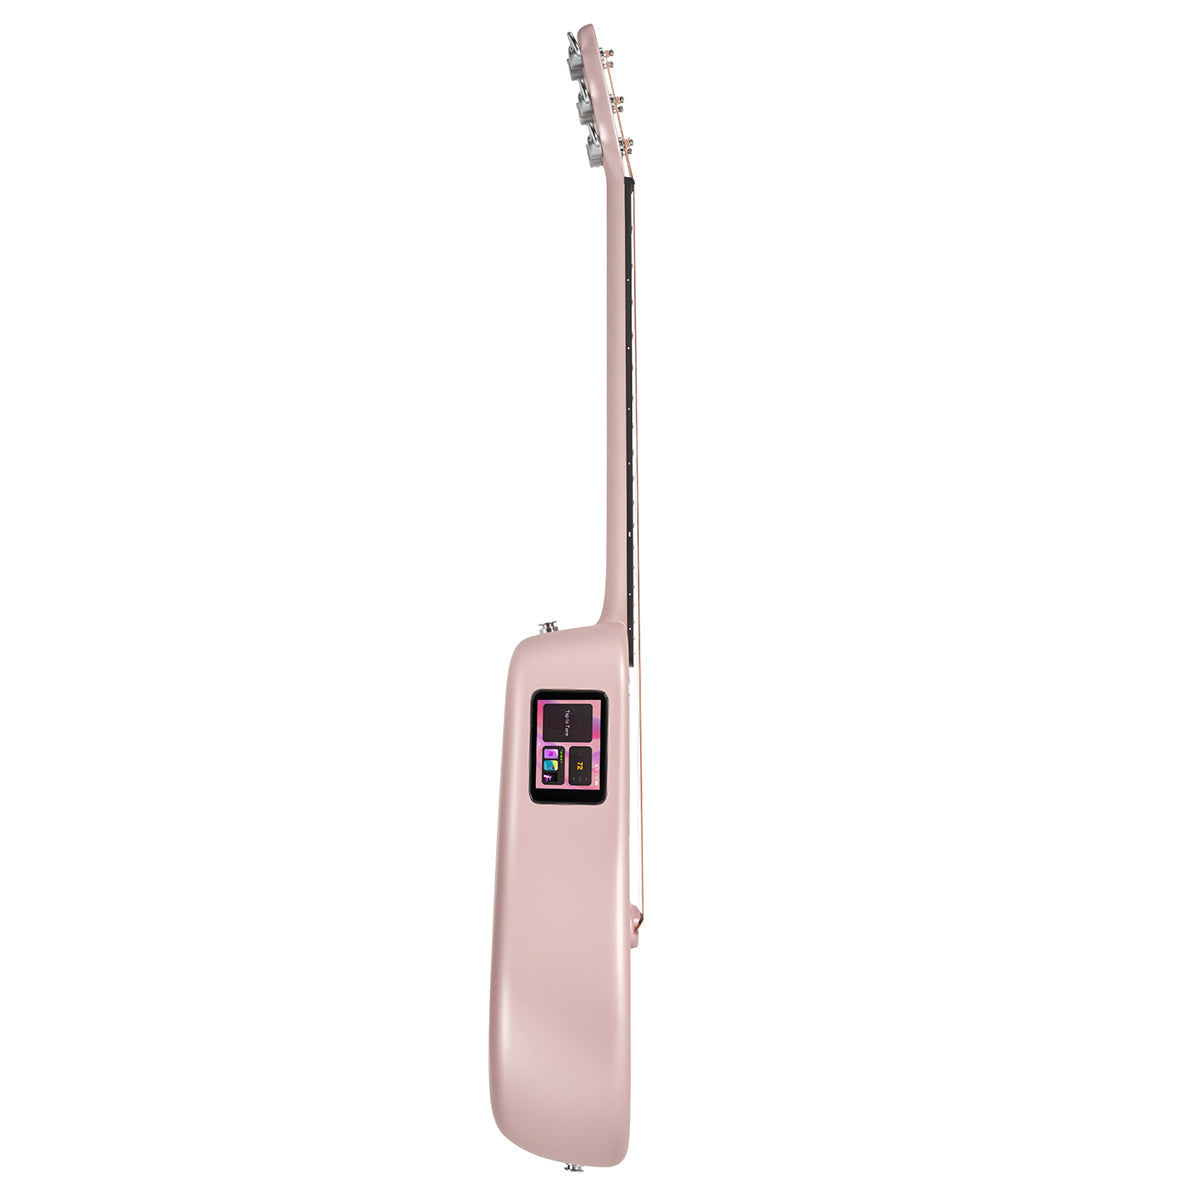 LAVA ME 3 38" with Space Bag ~ Pink, Acoustic Guitar for sale at Richards Guitars.